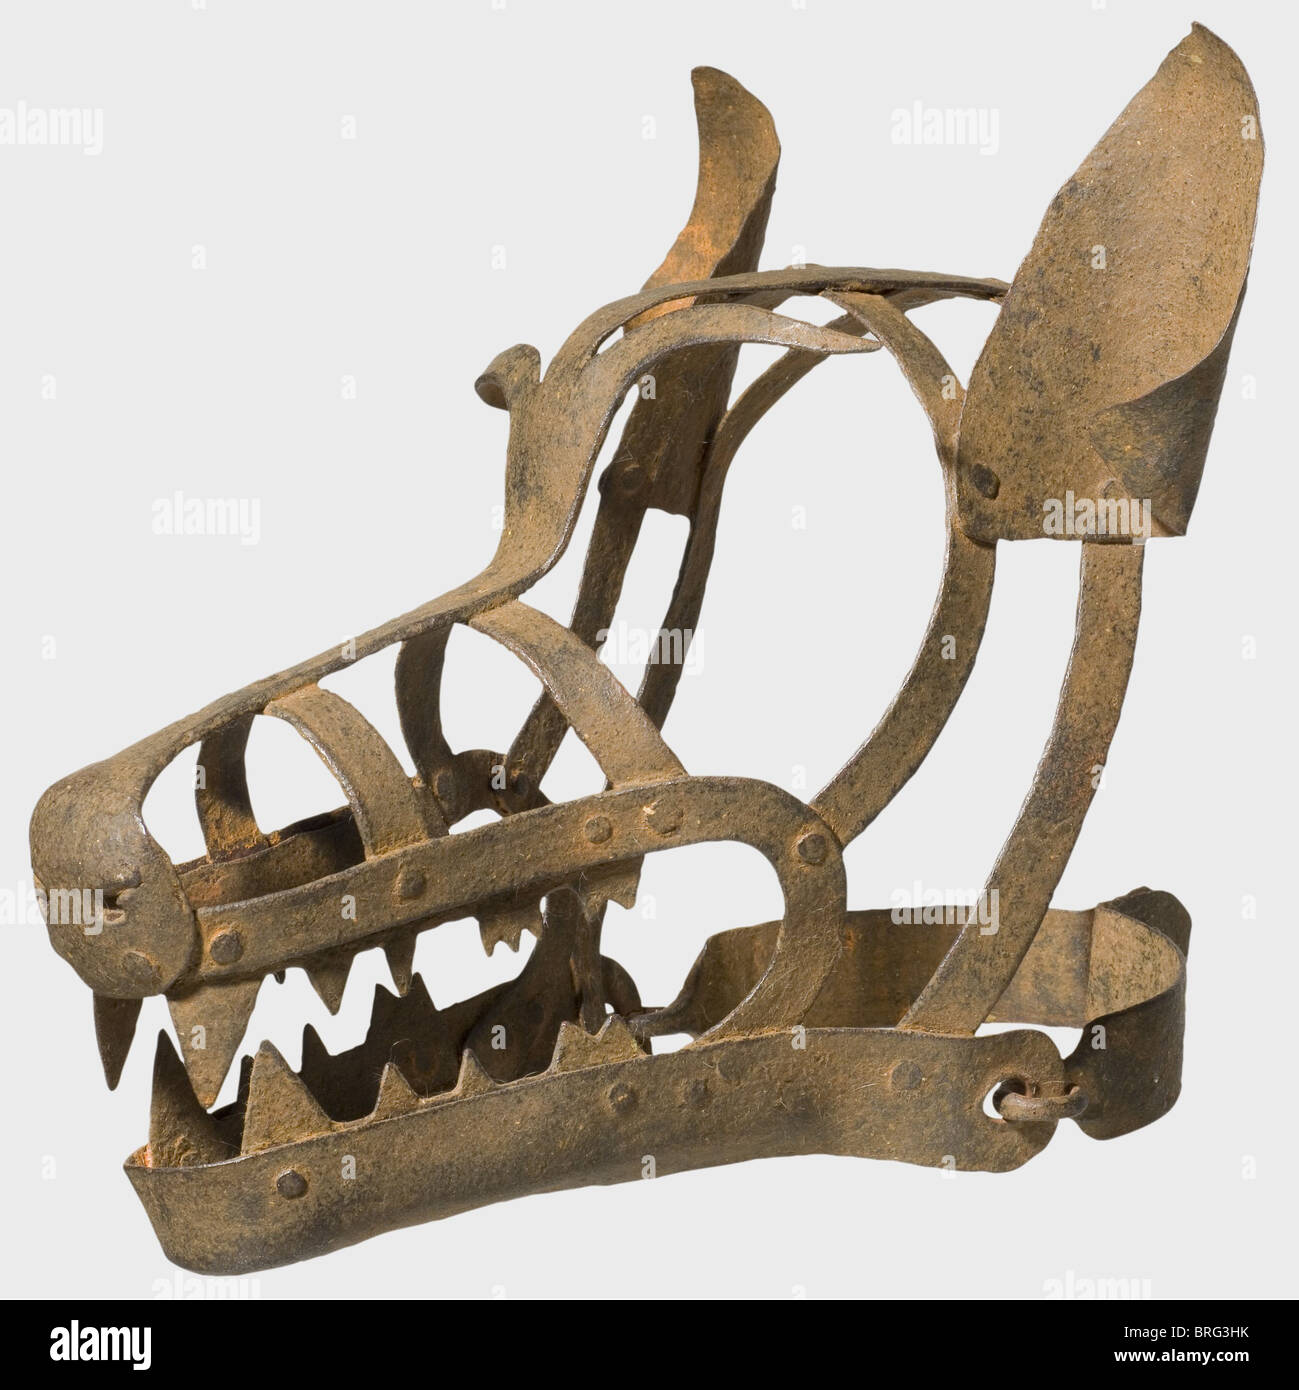 A German mask of disgrace in the shape of a wolf's head,16th/17th century. Forged iron. A mask made from riveted bar stock with pronounced teeth and ears attached by rivets. Two piece,hinged neckband. At the nape of the neck loops for a padlock. Length 40 cm. A mask of disgrace in the shape of a wolf's head was placed on those pilloried for deeds of violence. historic,historical,,17th century,16th century,instrument of torture,torture device,instruments of torture,torture devices,object,objects,stills,clipping,clippings,cut out,cut-out,cut-outs,Additional-Rights-Clearences-Not Available Stock Photo